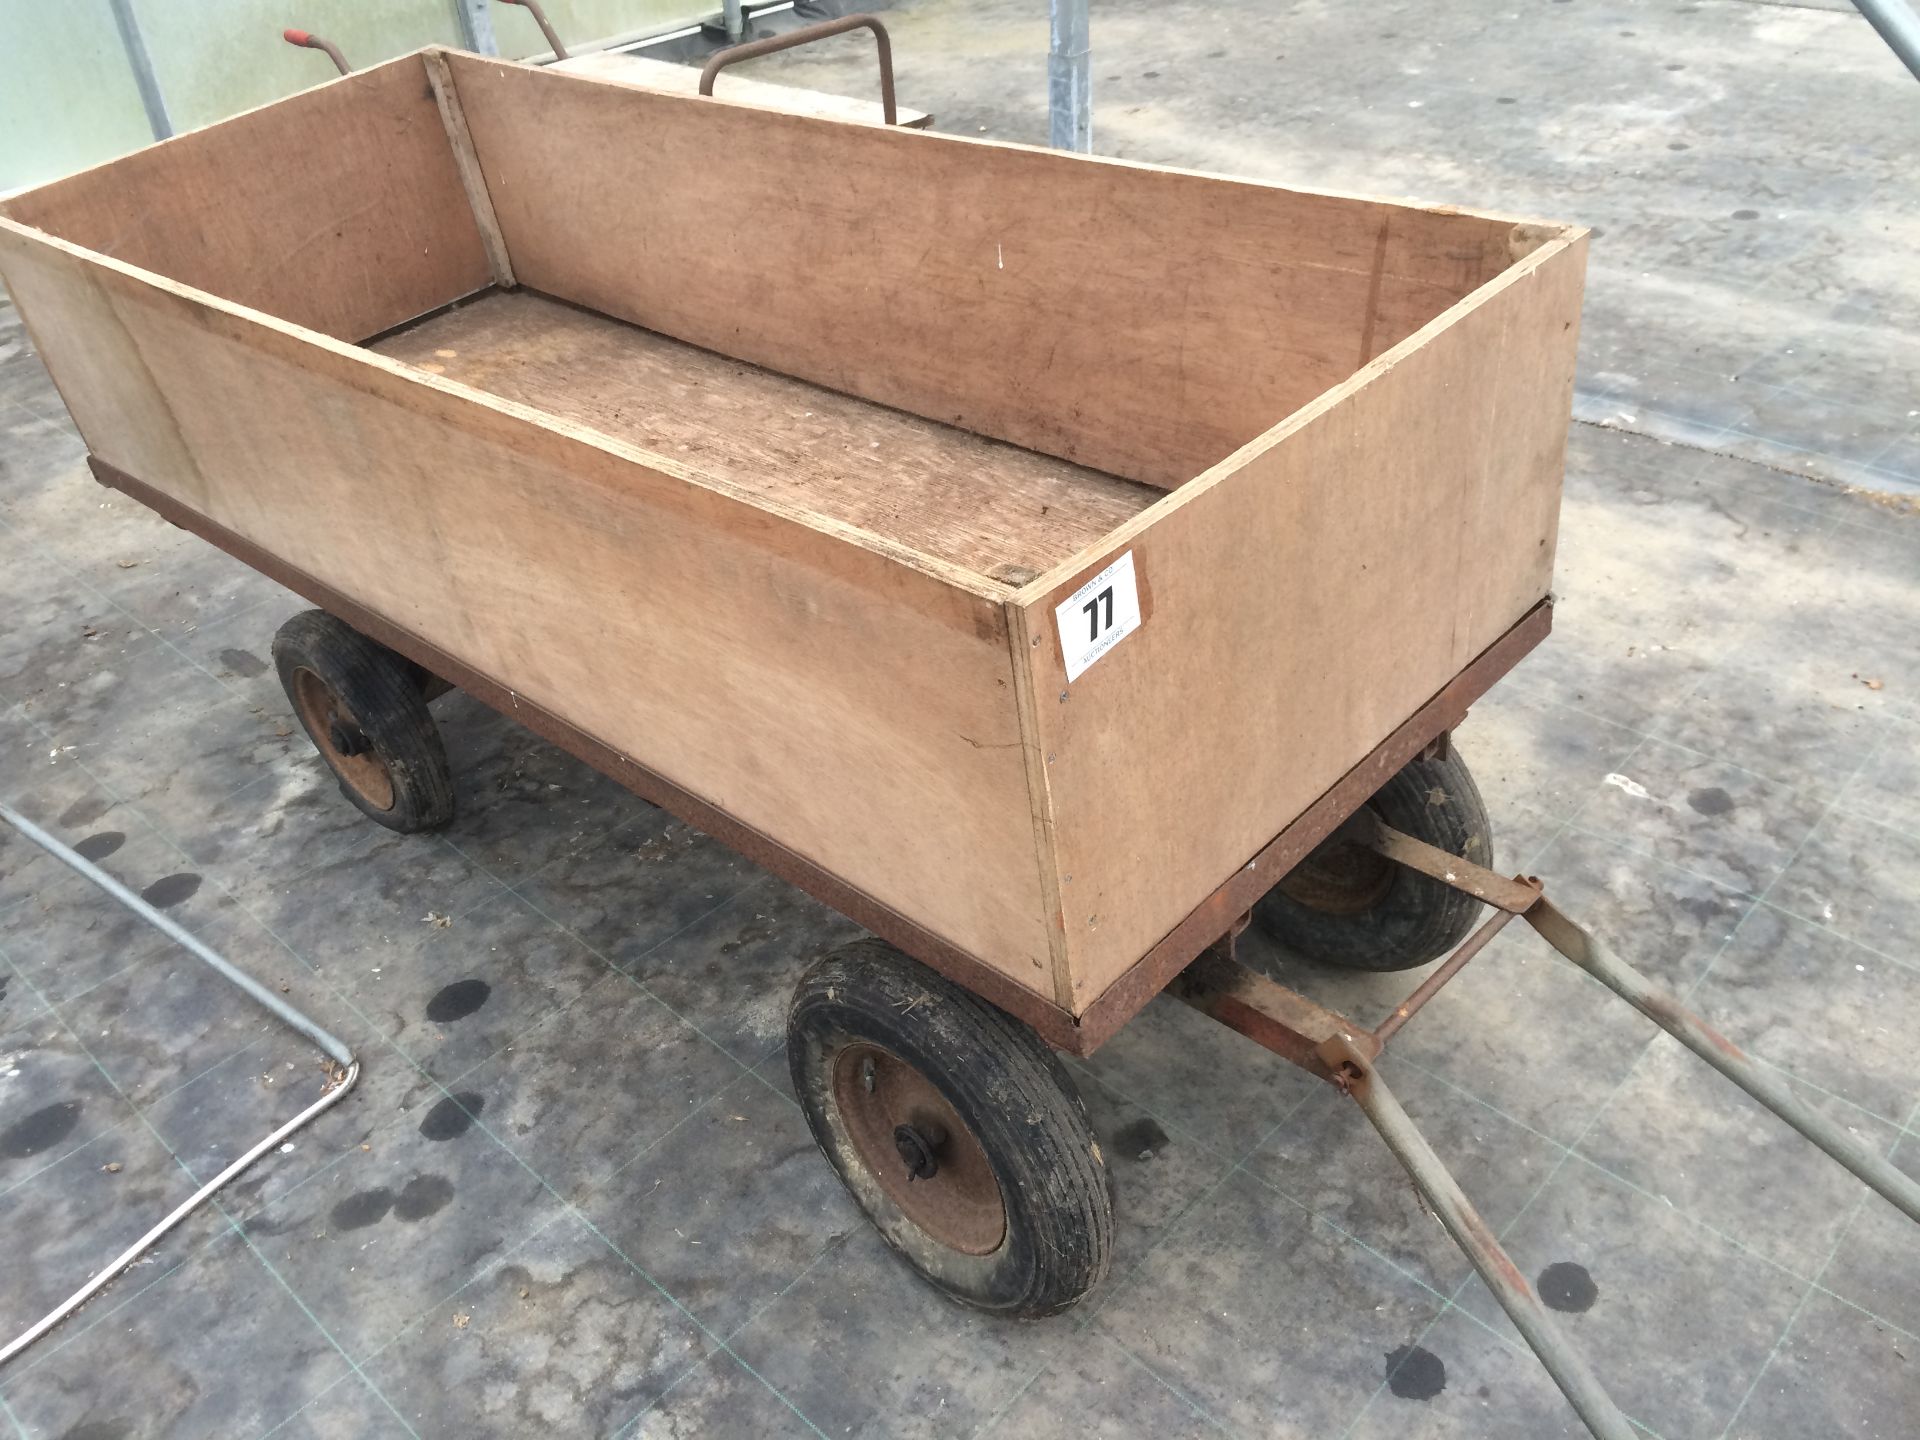 4 Wheel Trolley with sides